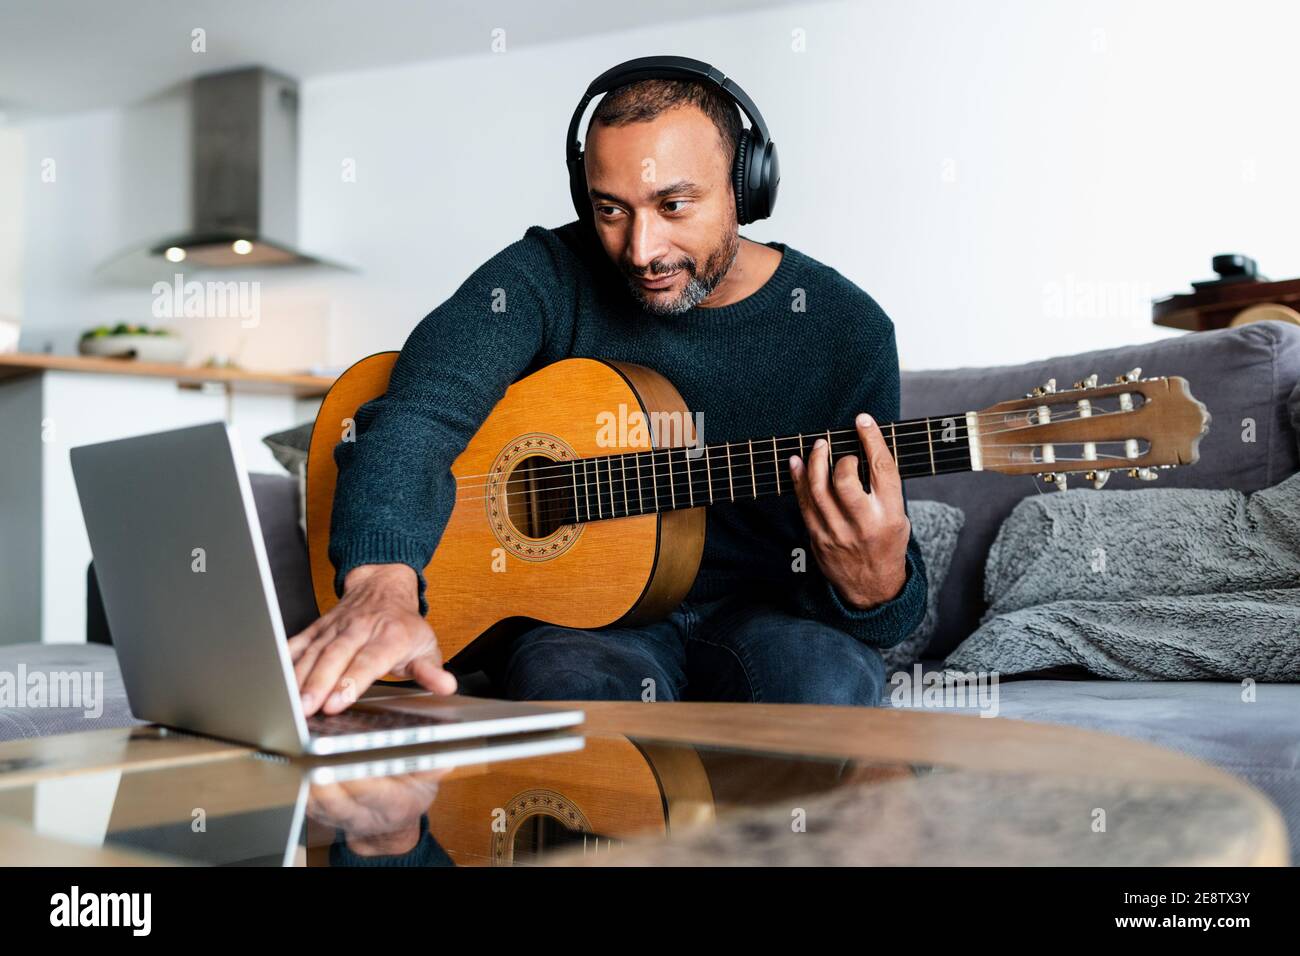 Black man playing the guitar at home and using a laptop Stock Photo